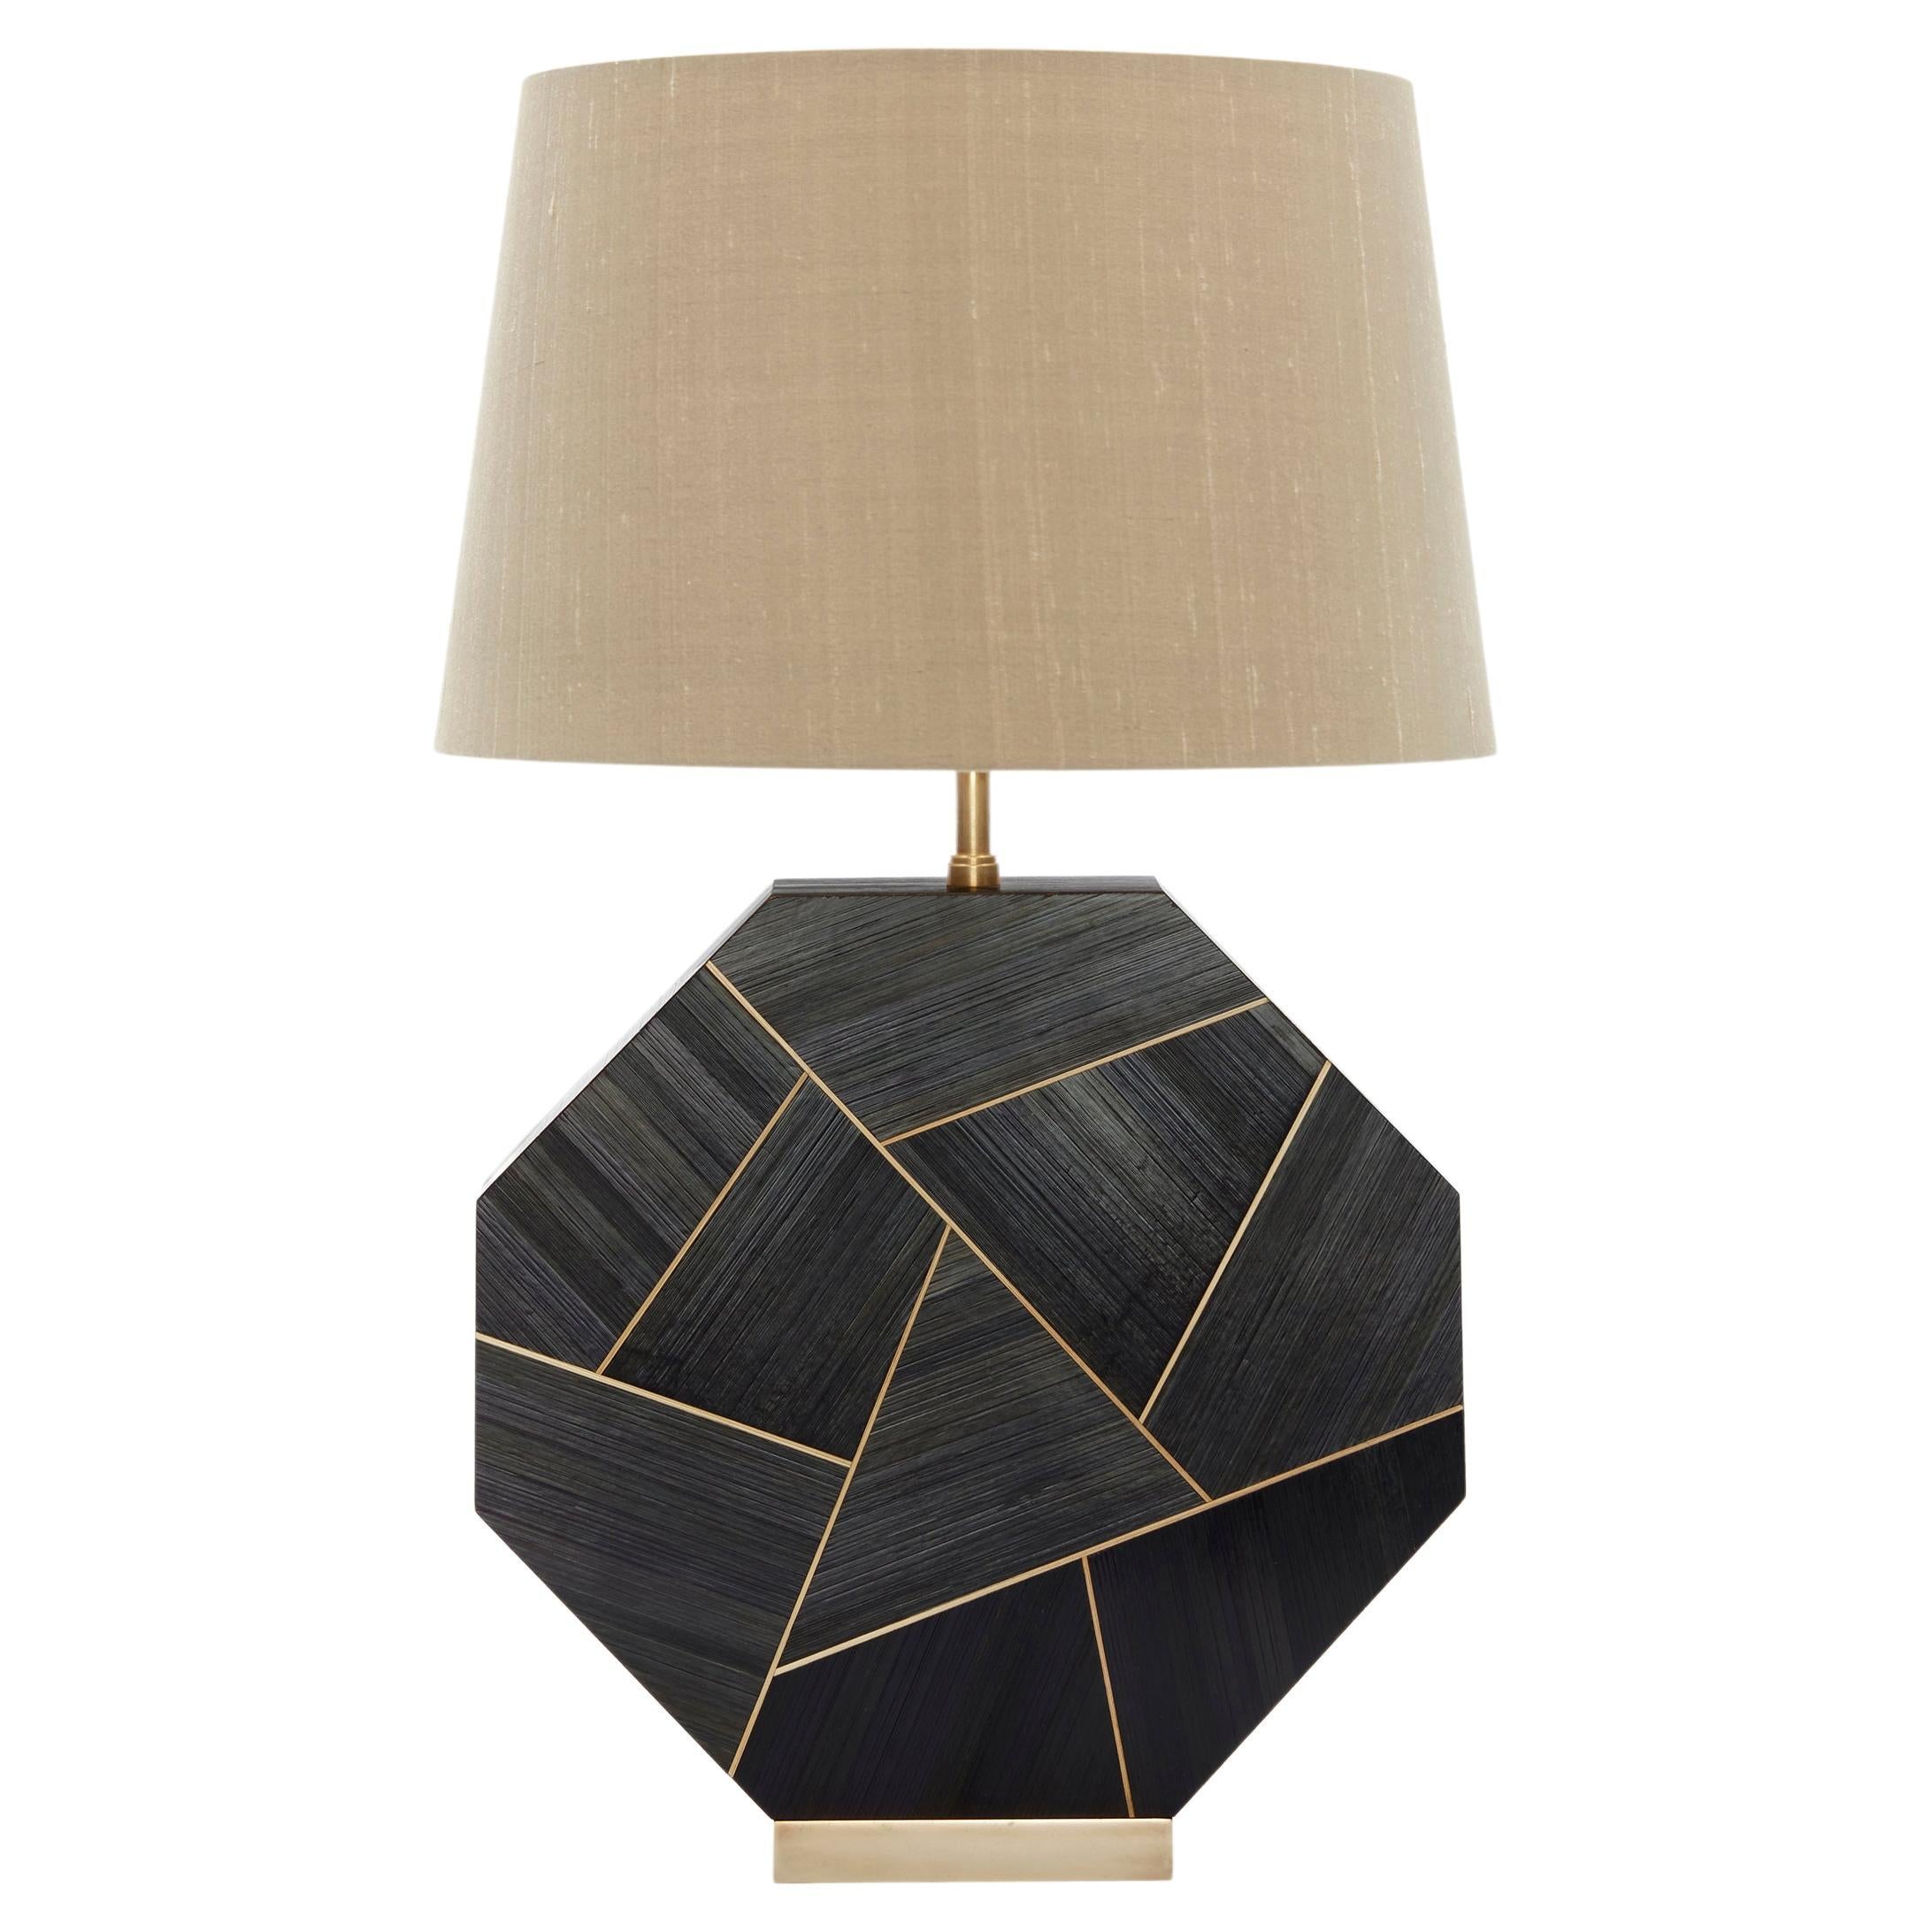 Octagonal Black Straw Marquetry Table Lamp Handmade in Uk Contemporary For Sale